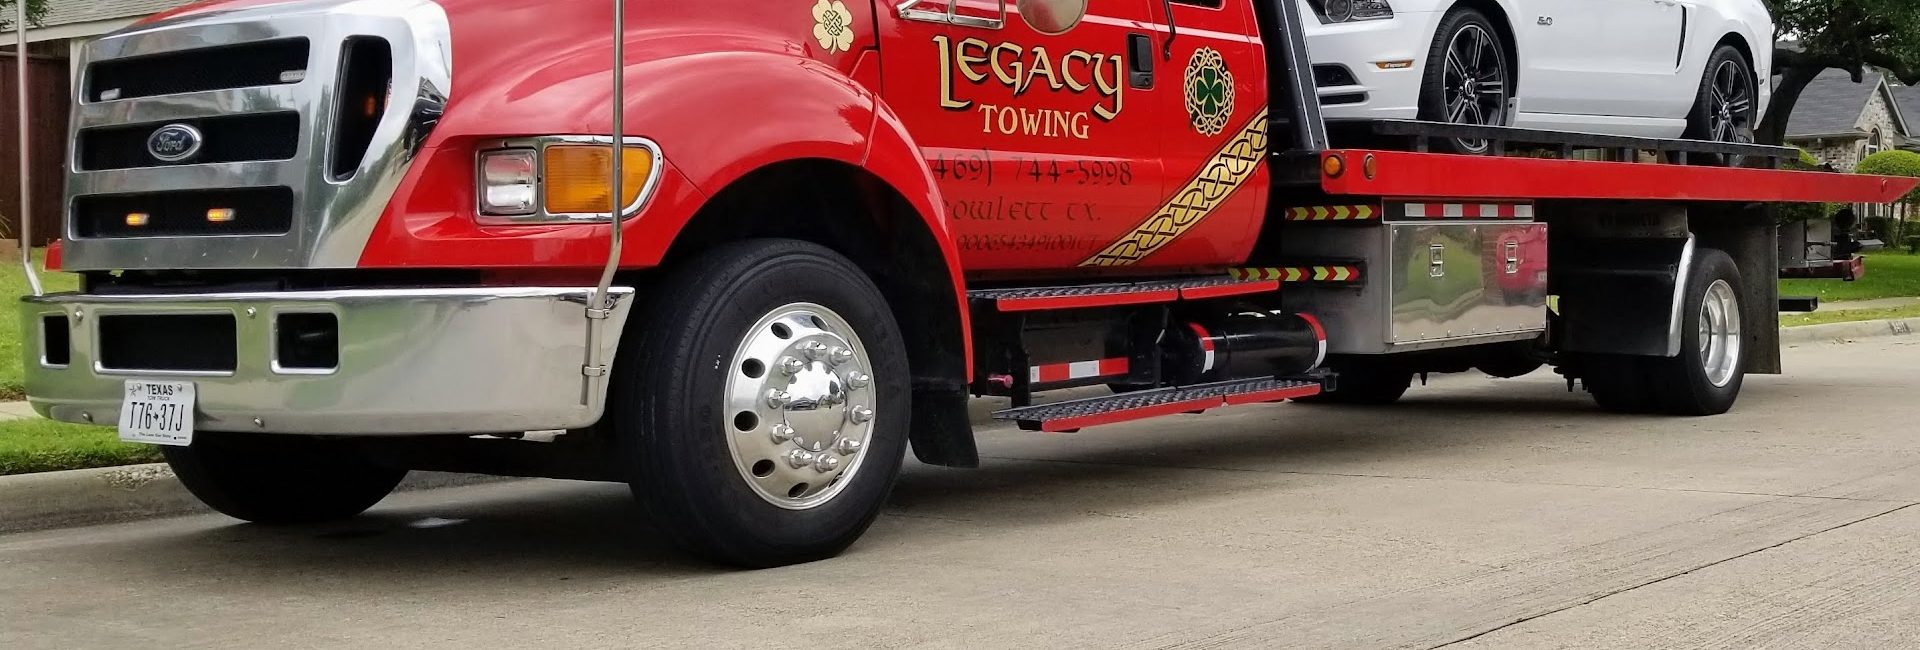 Legacy Roadside Assistance and Towing 6